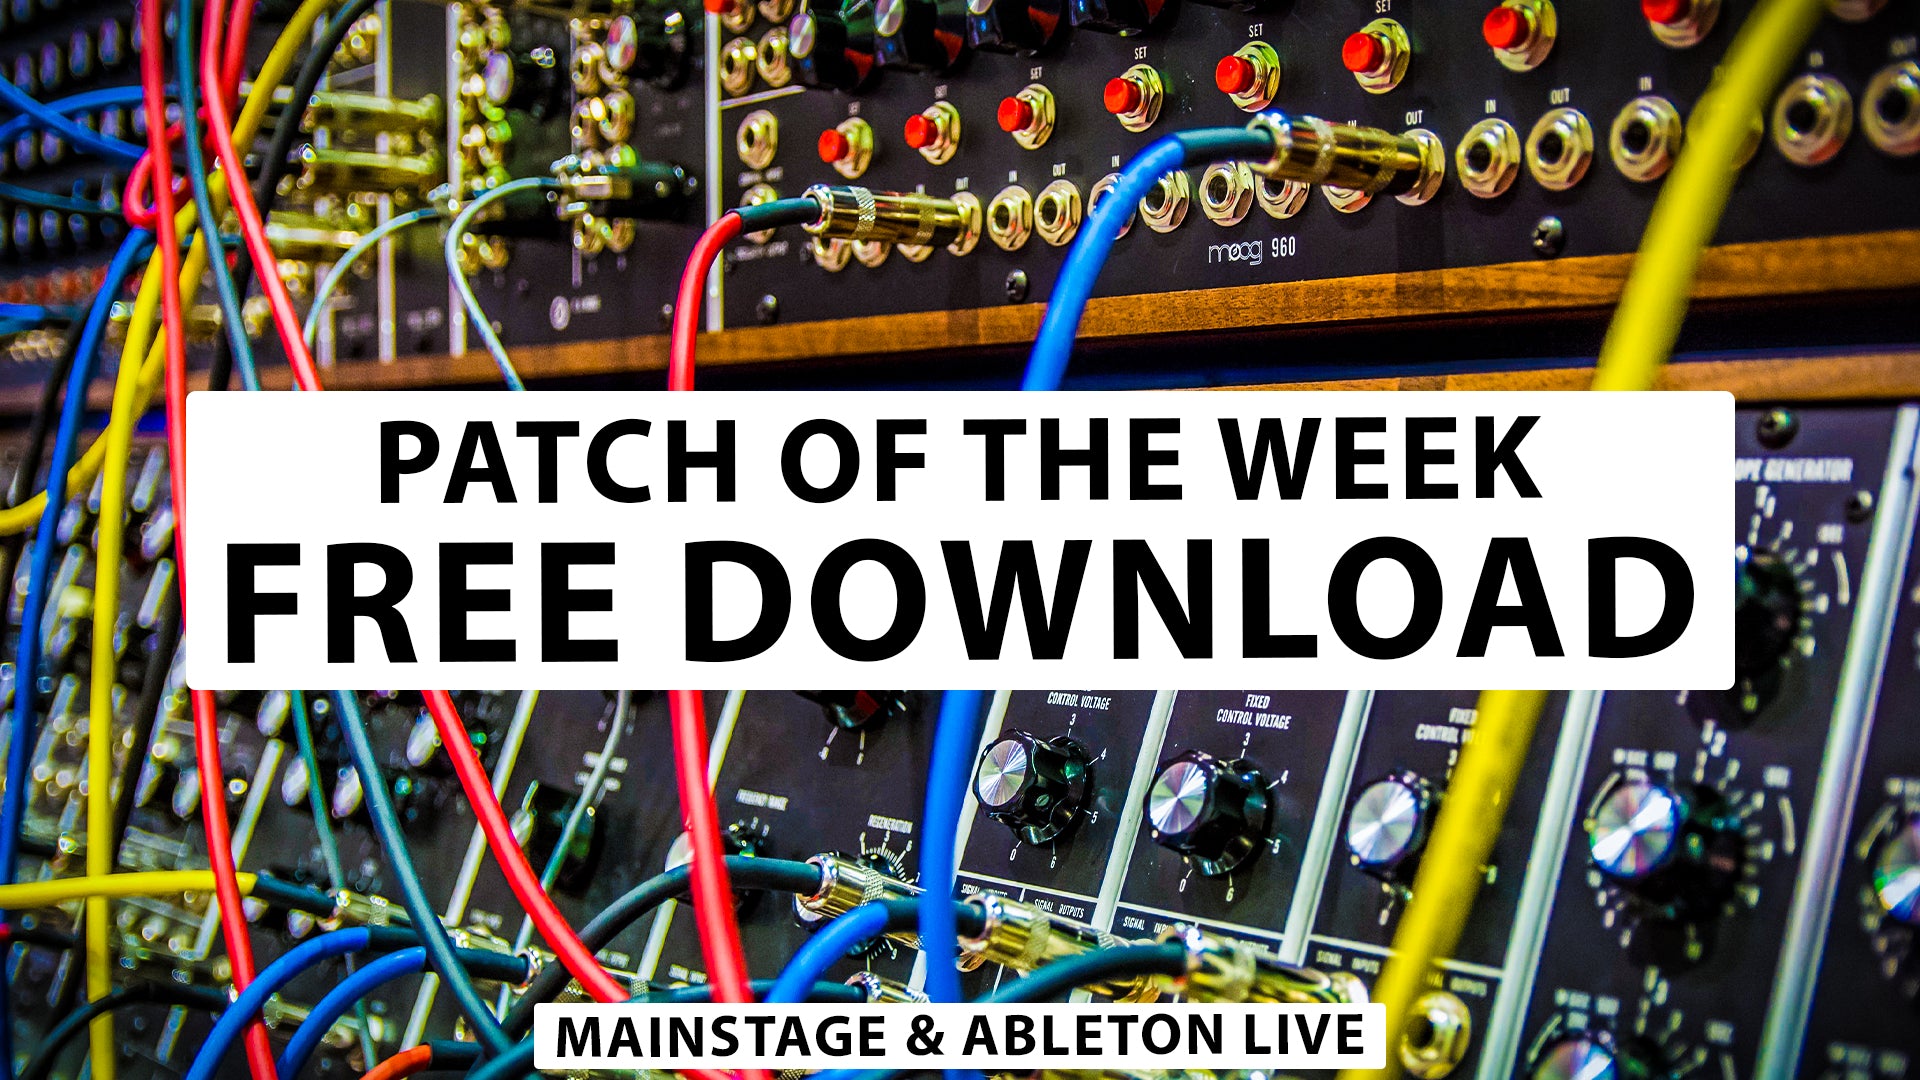 Ashes To Ashes Arp - Free MainStage & Ableton Worship Patch!